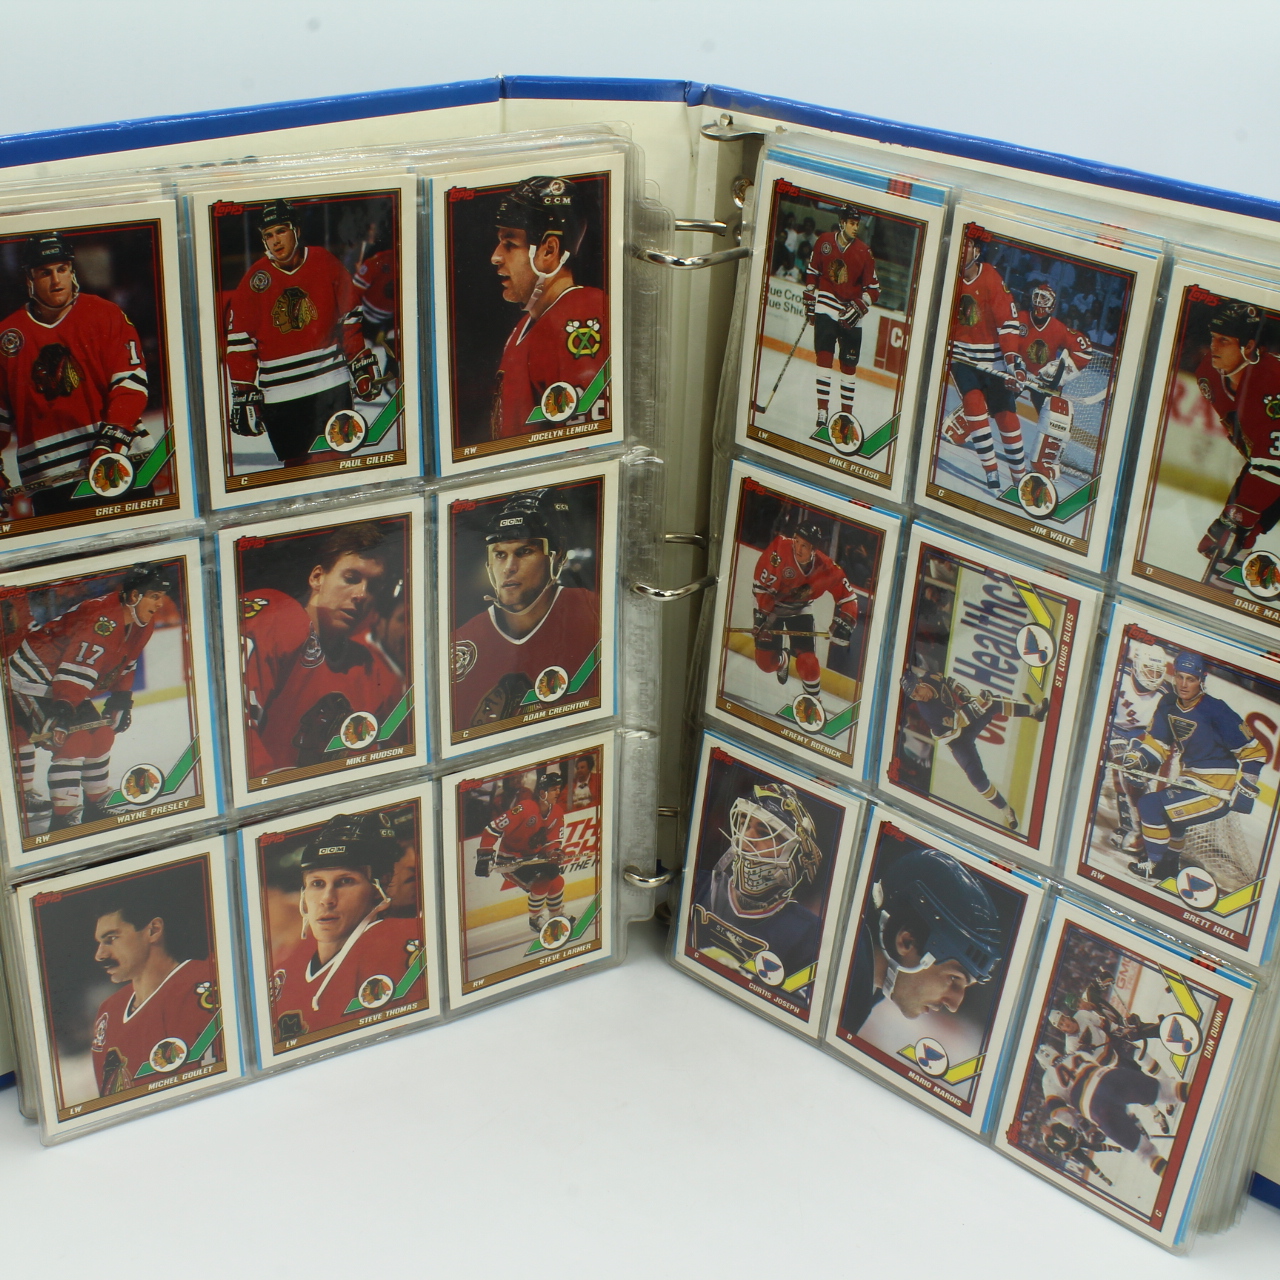 Cards, 1991 Topps NHL Hockey Album Appx 500 Cards